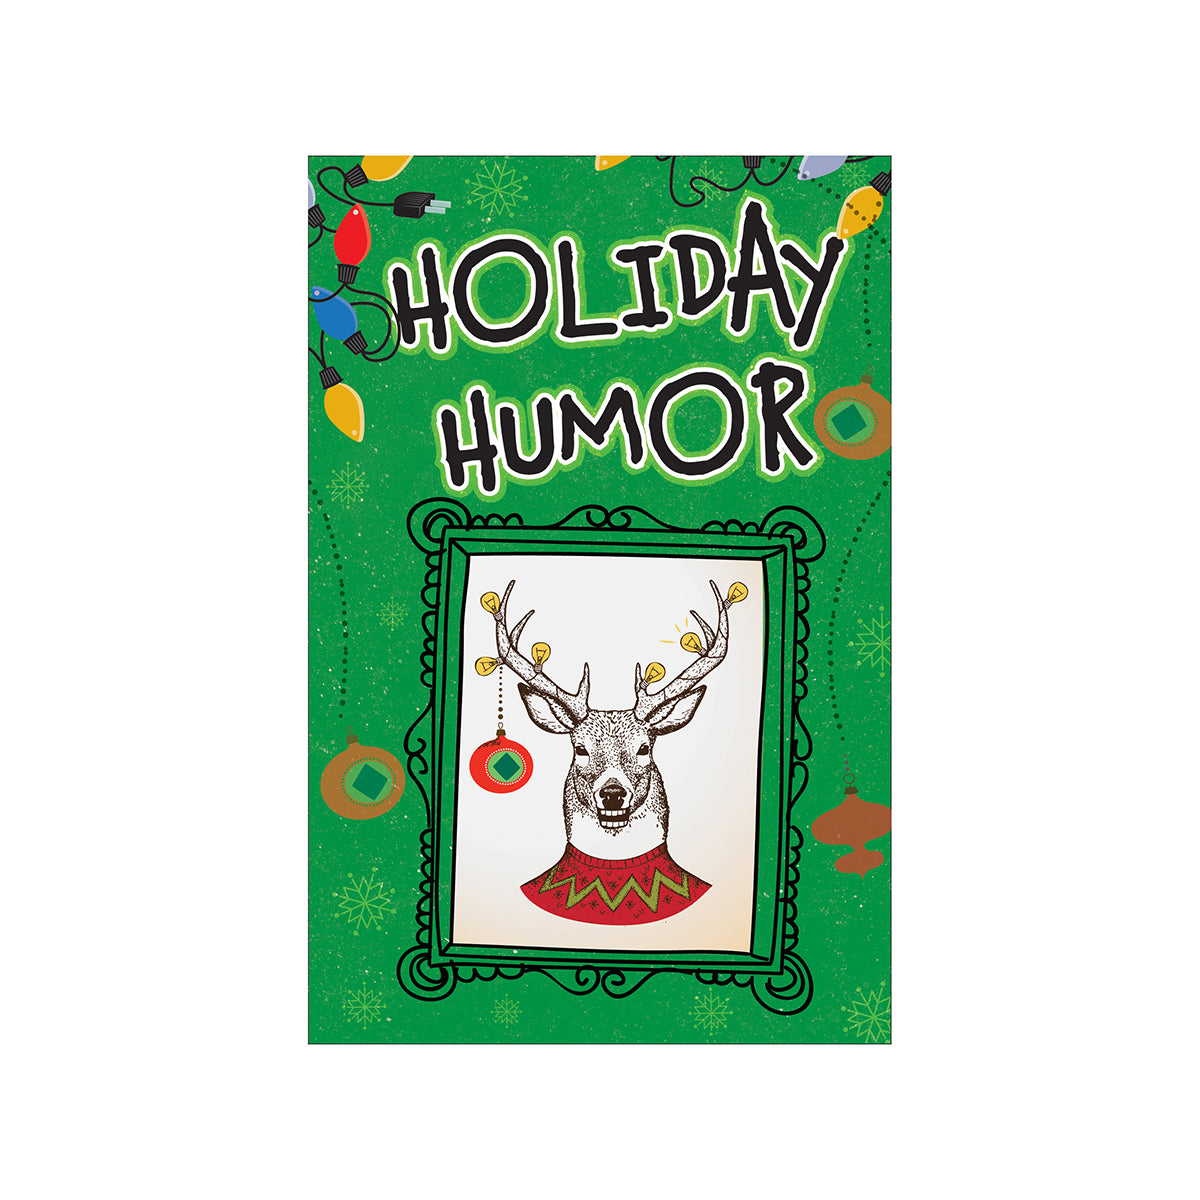 Holiday Humor Christmas Themed Stories Song Parodies Jokes Cartoons and More!